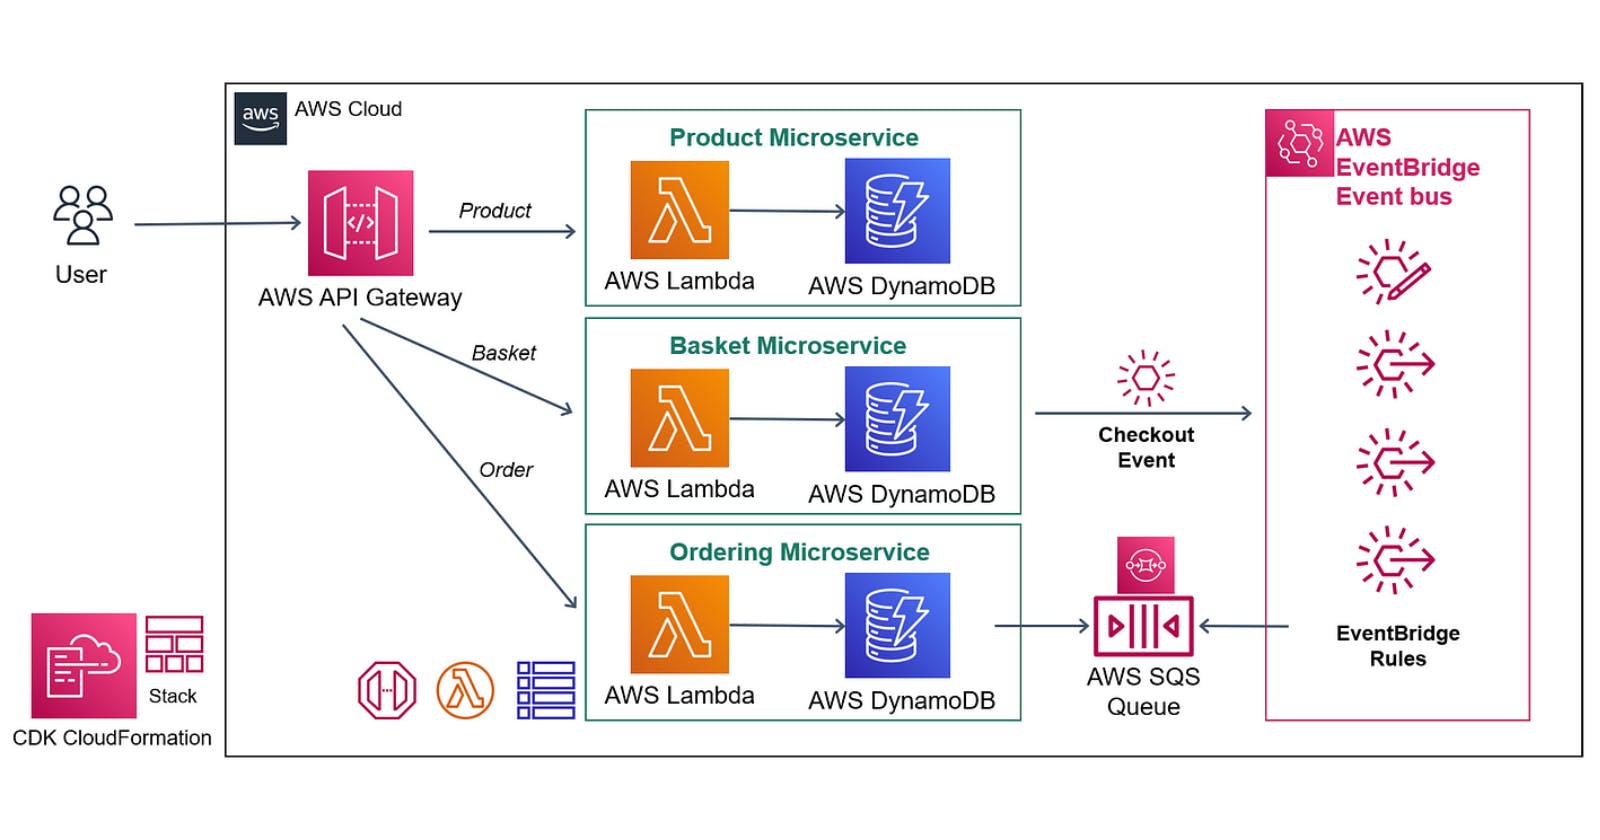 Microservices architecture with containerization and orchestration using AWS services